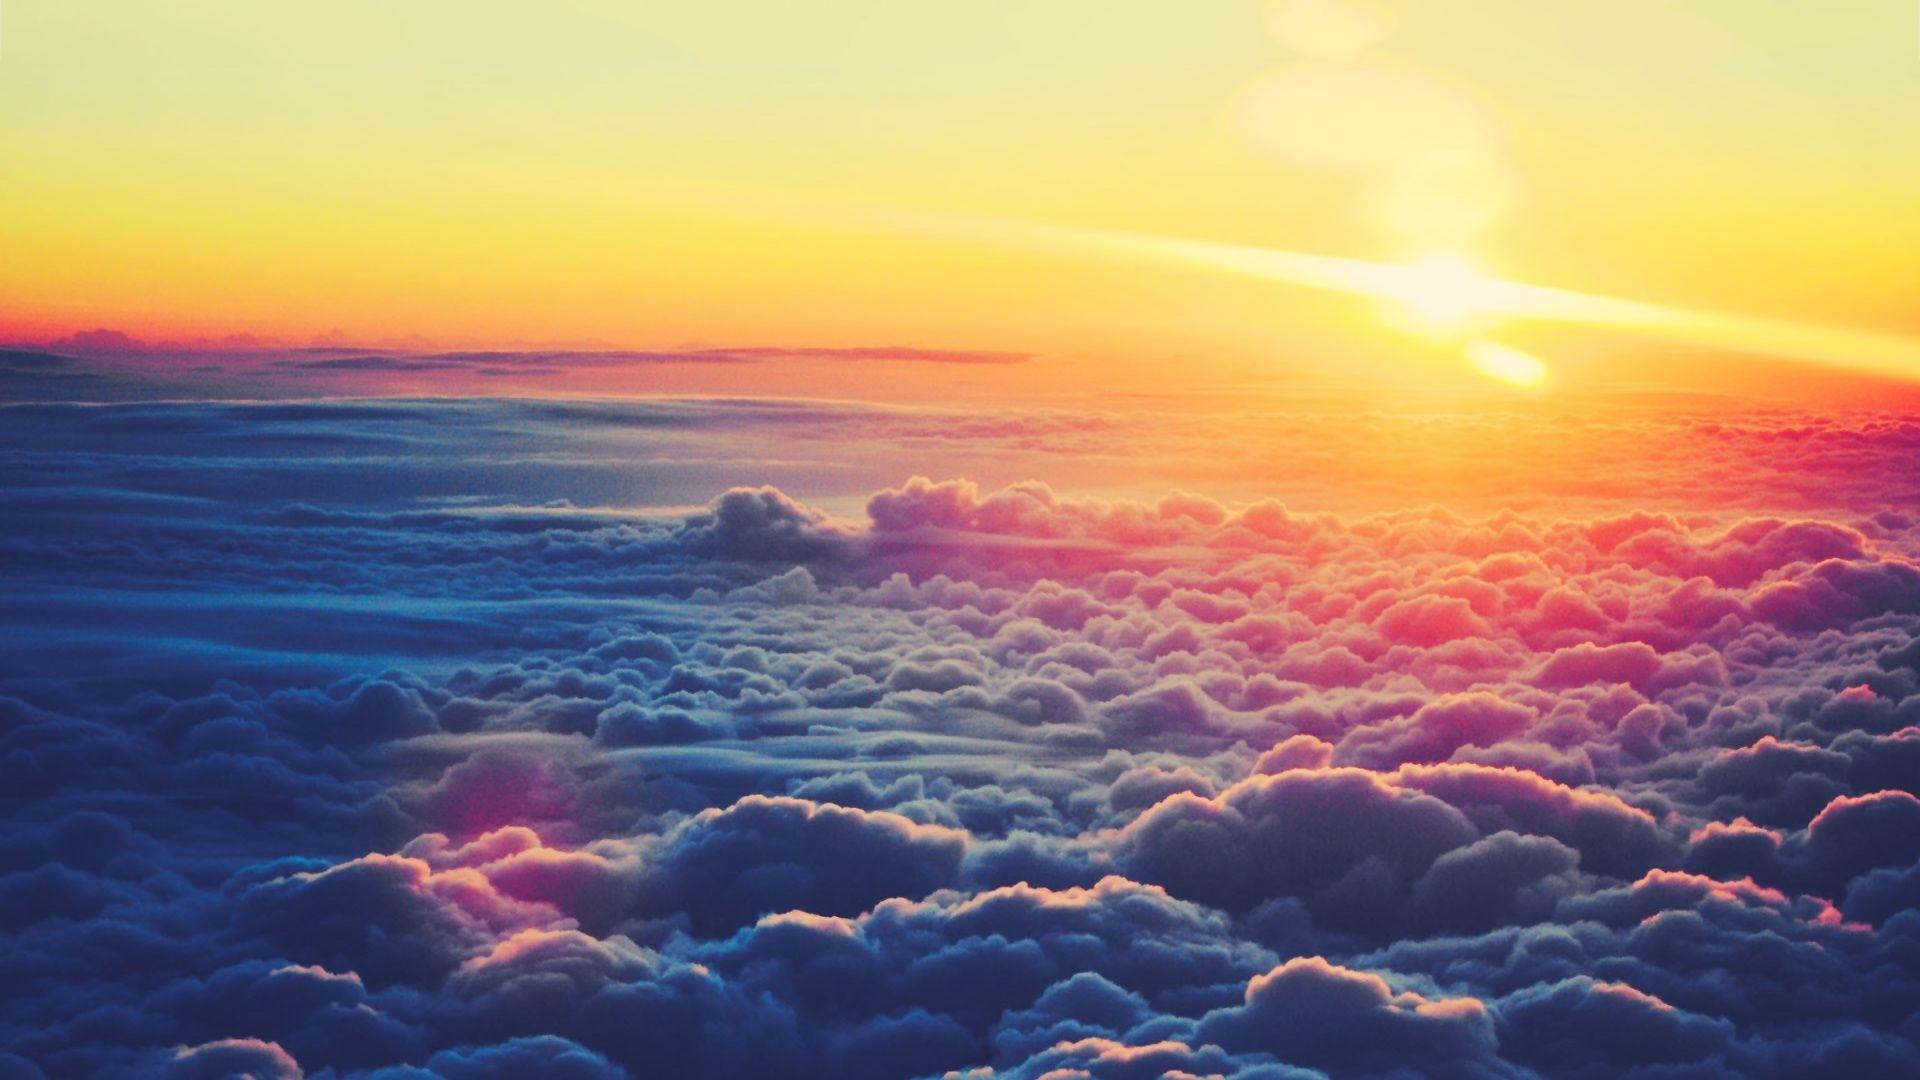 Sunset over clouds wallpaper 1920x1080. Back Grounds in 2019